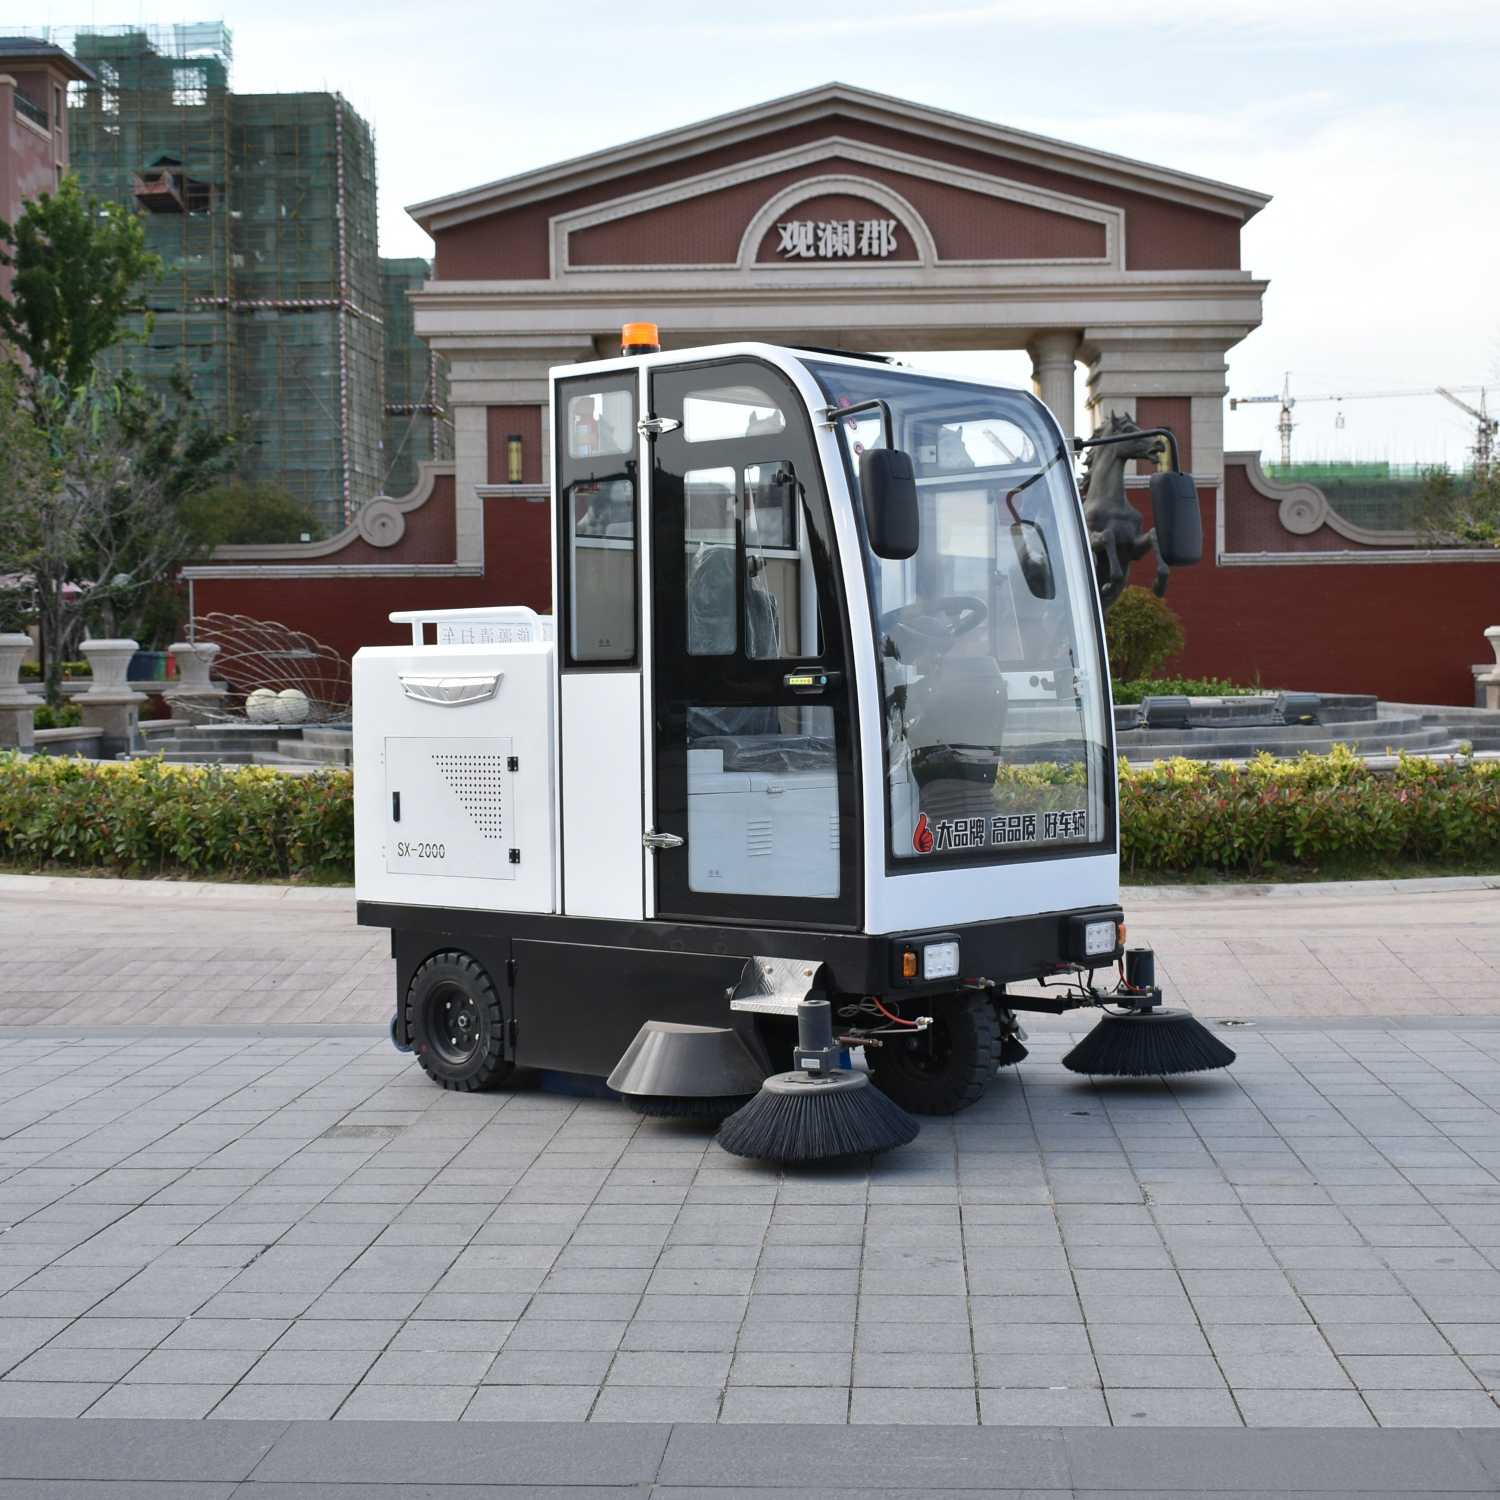 Rechargeable street sweeper - 9 